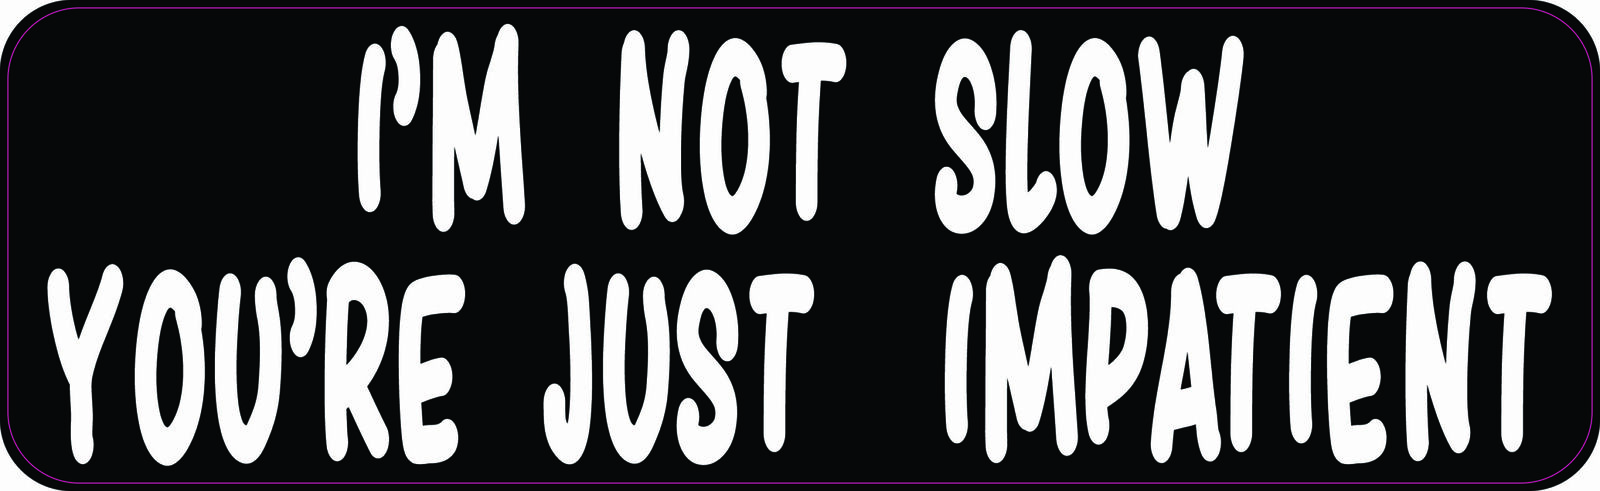 10x3 I'm Not Slow You're Just Impatient Sticker Car Truck Vehicle Bumper Decal